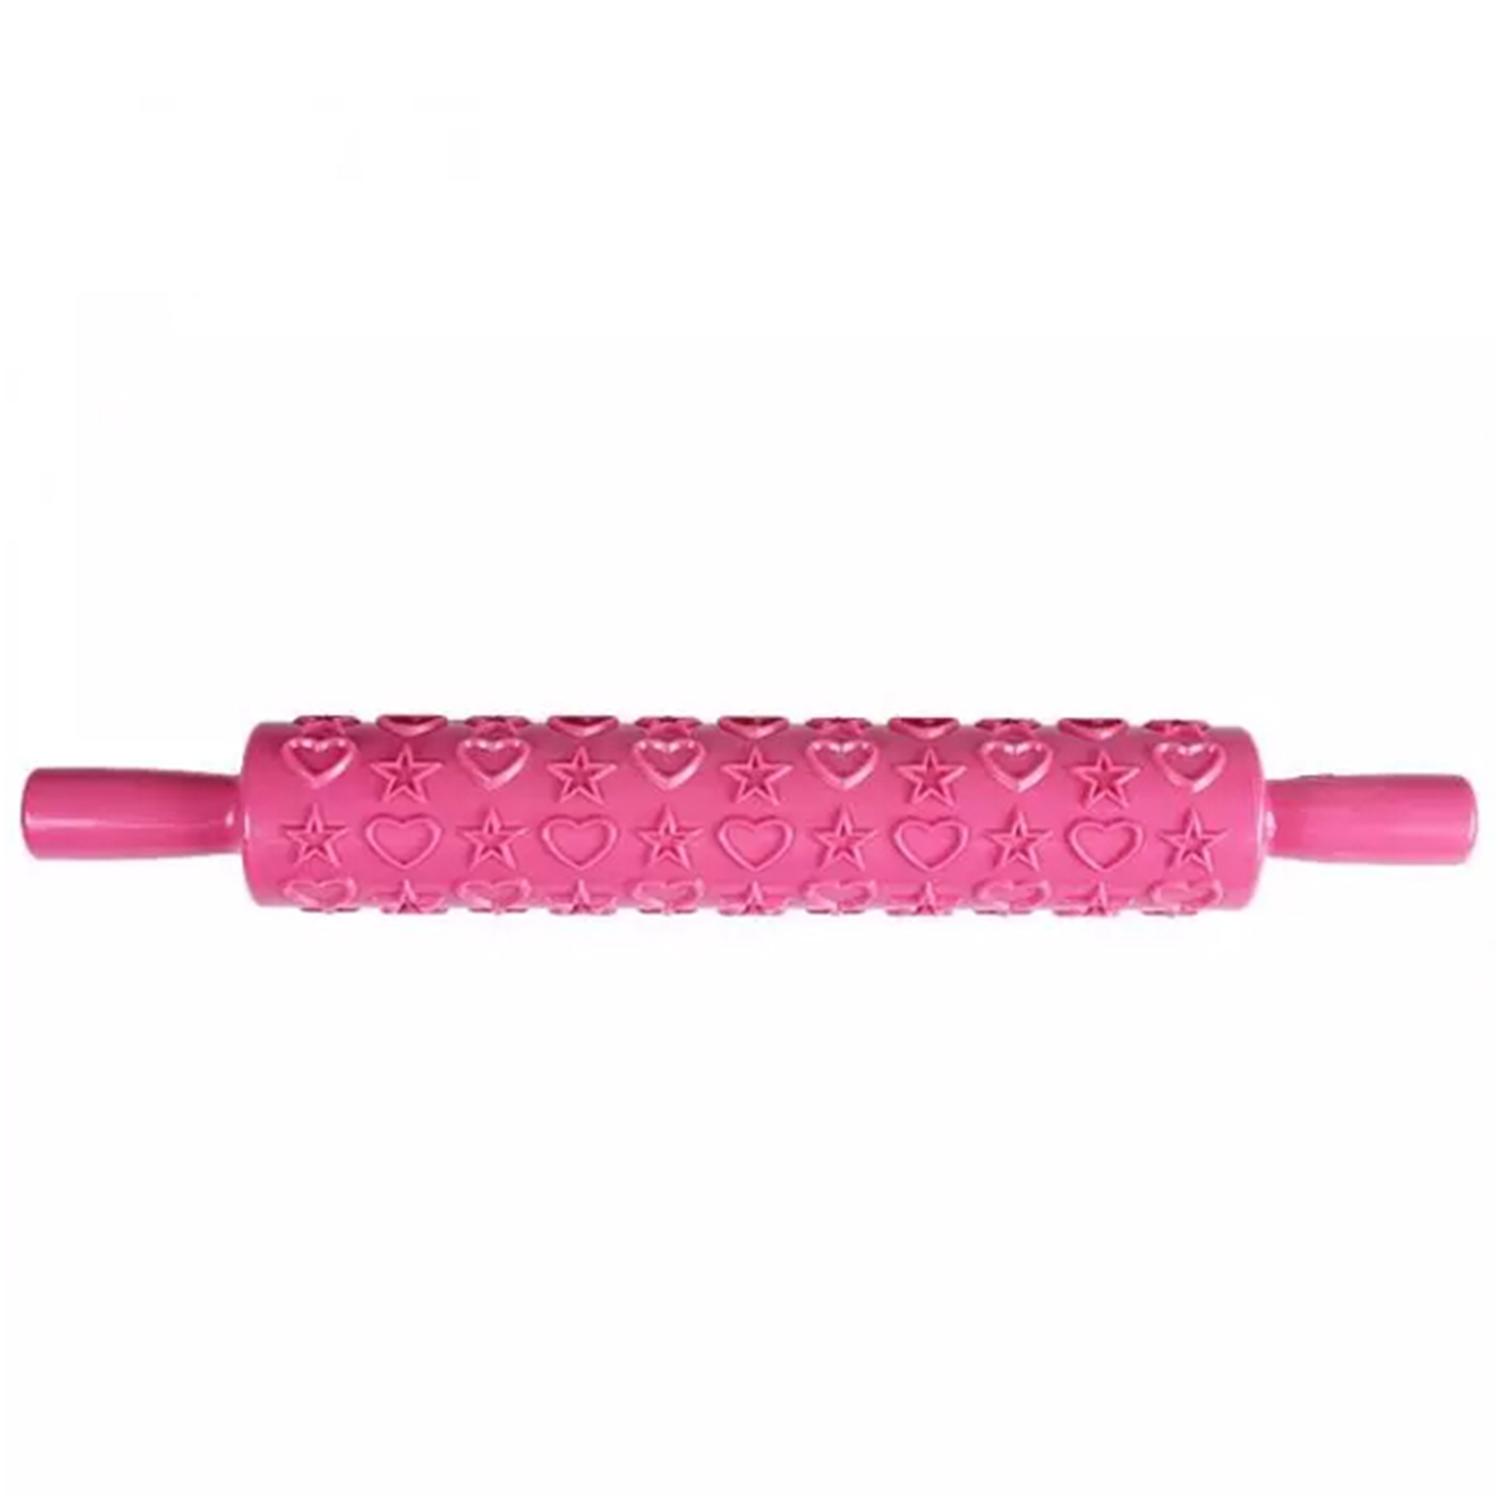 EMBOSSED ROLLING PIN 04 PINK HEART AND STARS